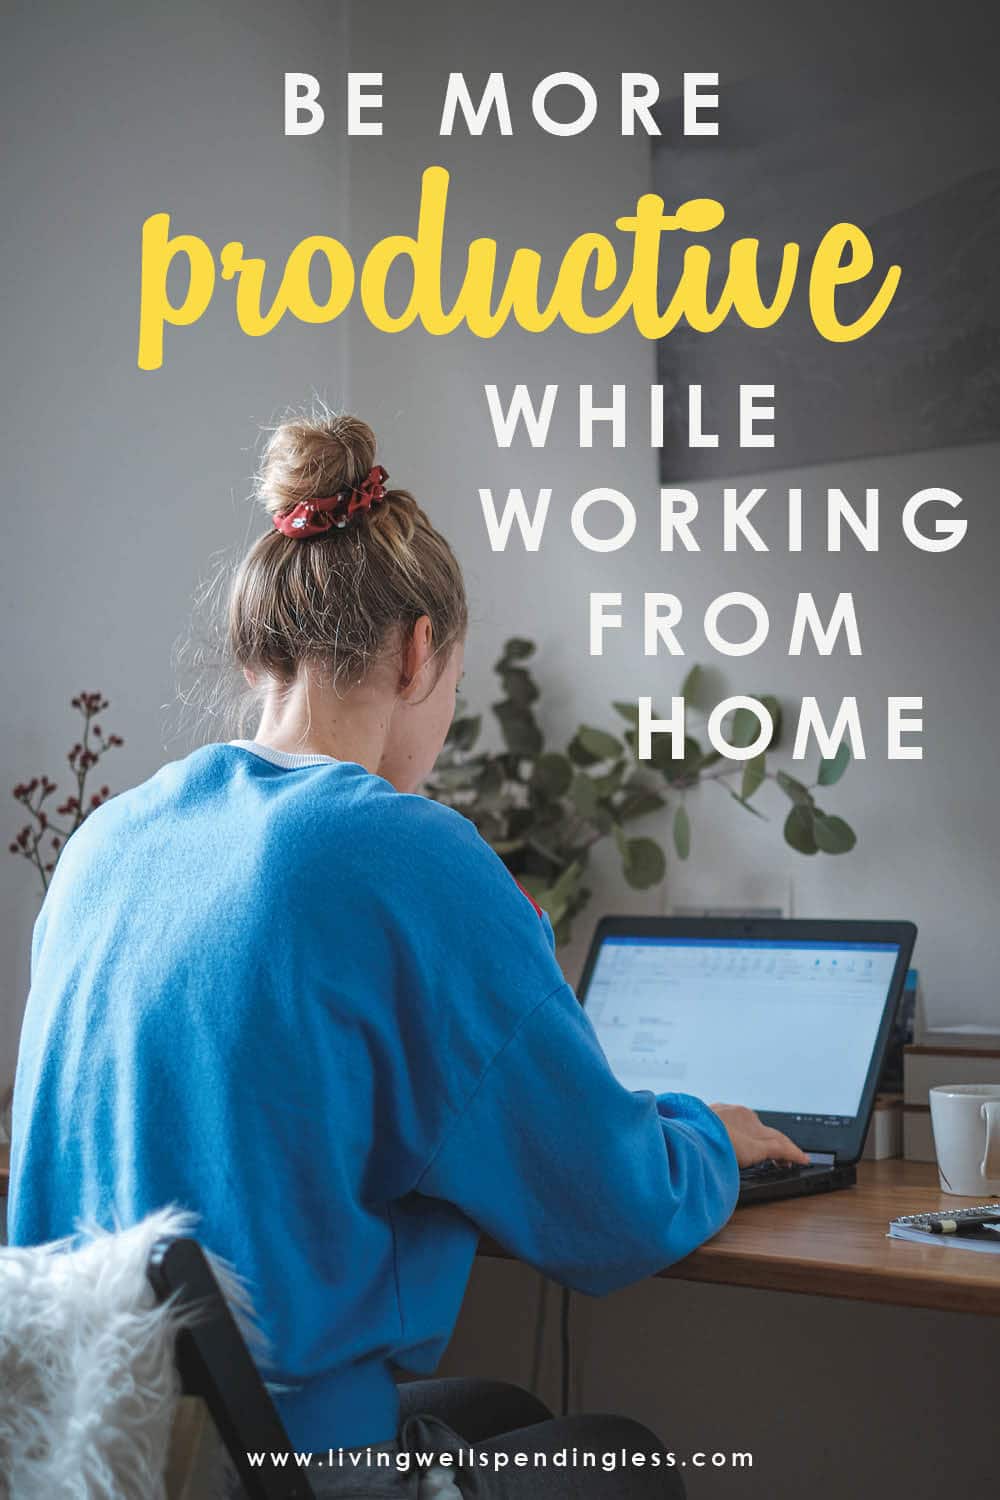 Working from home has its challenges no doubt, and even more so if it’s suddenly due to the COVID-19 pandemic. So how can you still be productive and get what you need done? Don’t miss these 7 powerful strategies to help you successfully navigate working from home. #workingfromhome #tipsforworkingfromhome